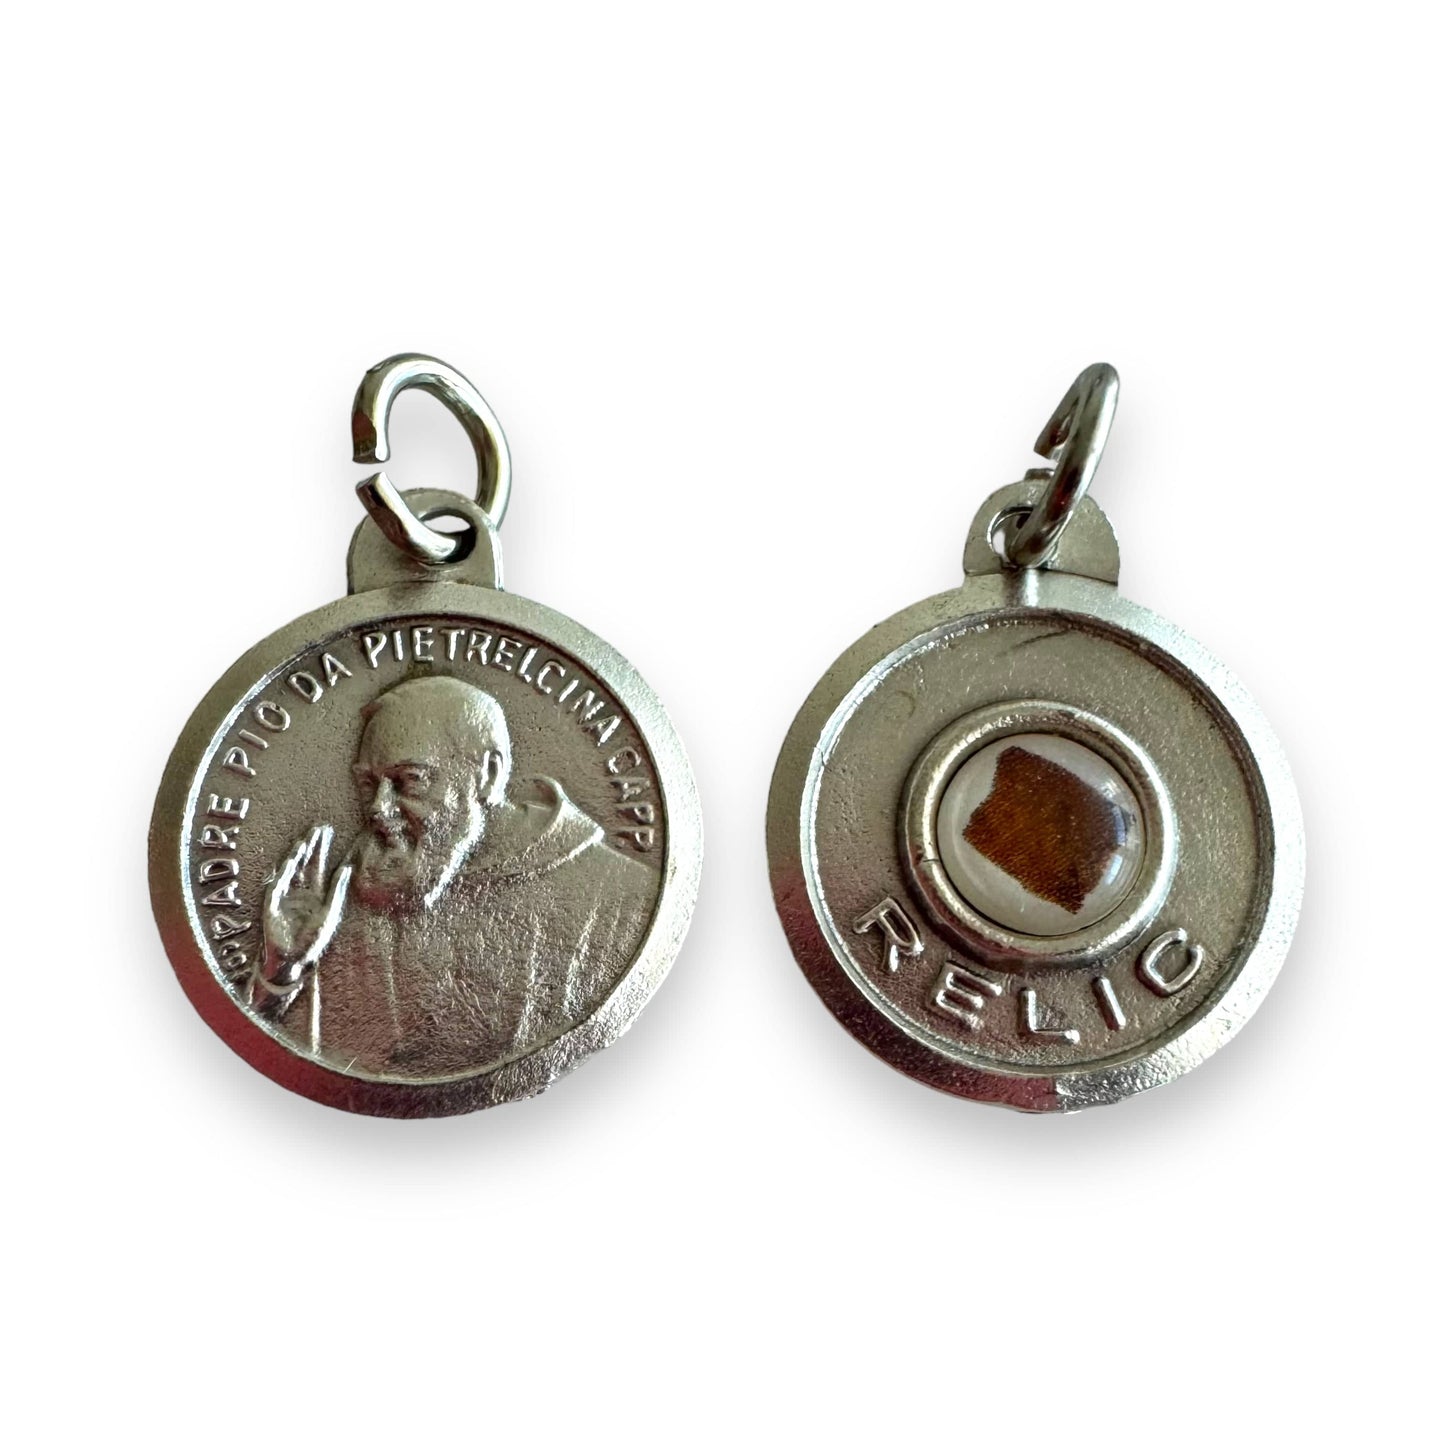 Catholically Patron Saint Medal Padre Pio Relic Medal - Silver-Tone Pendant with 'Ex Indumentis' Relic